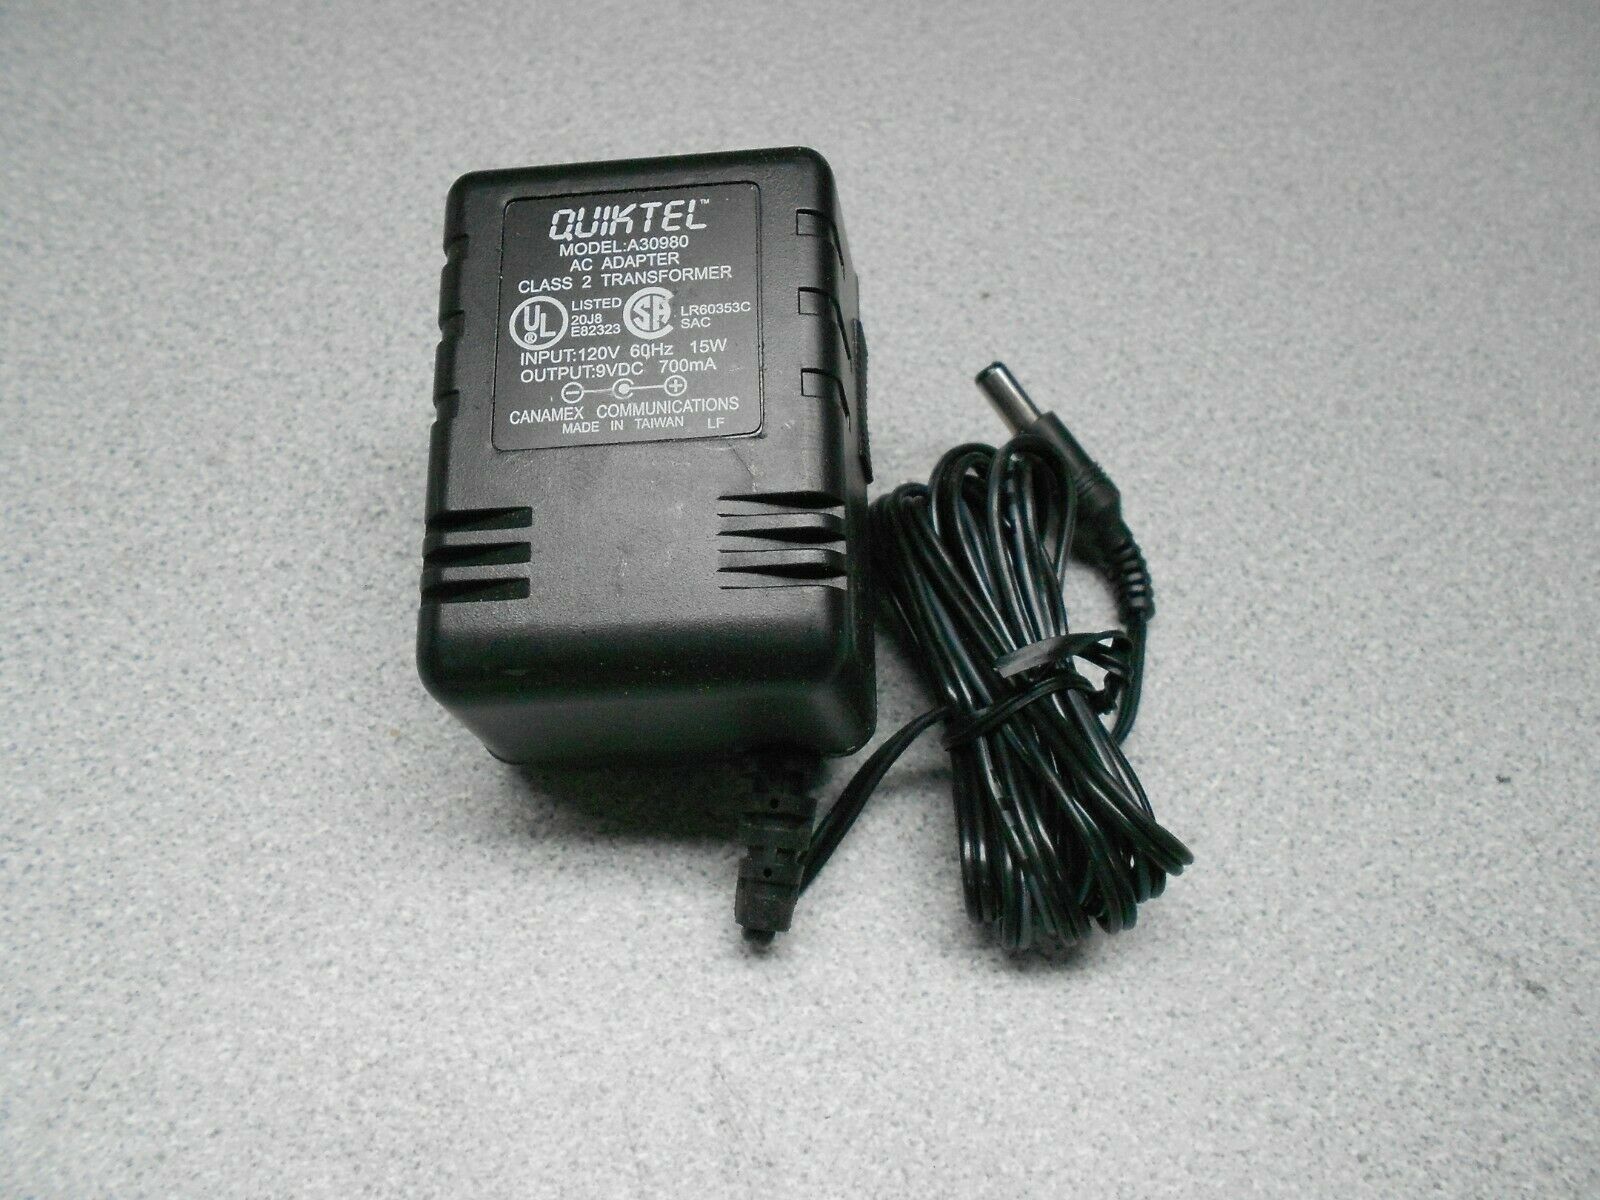 New Quiktel Model A30980 Power Supply 9VDC 800mA Country/Region of Manufacture: China Custom Bundl